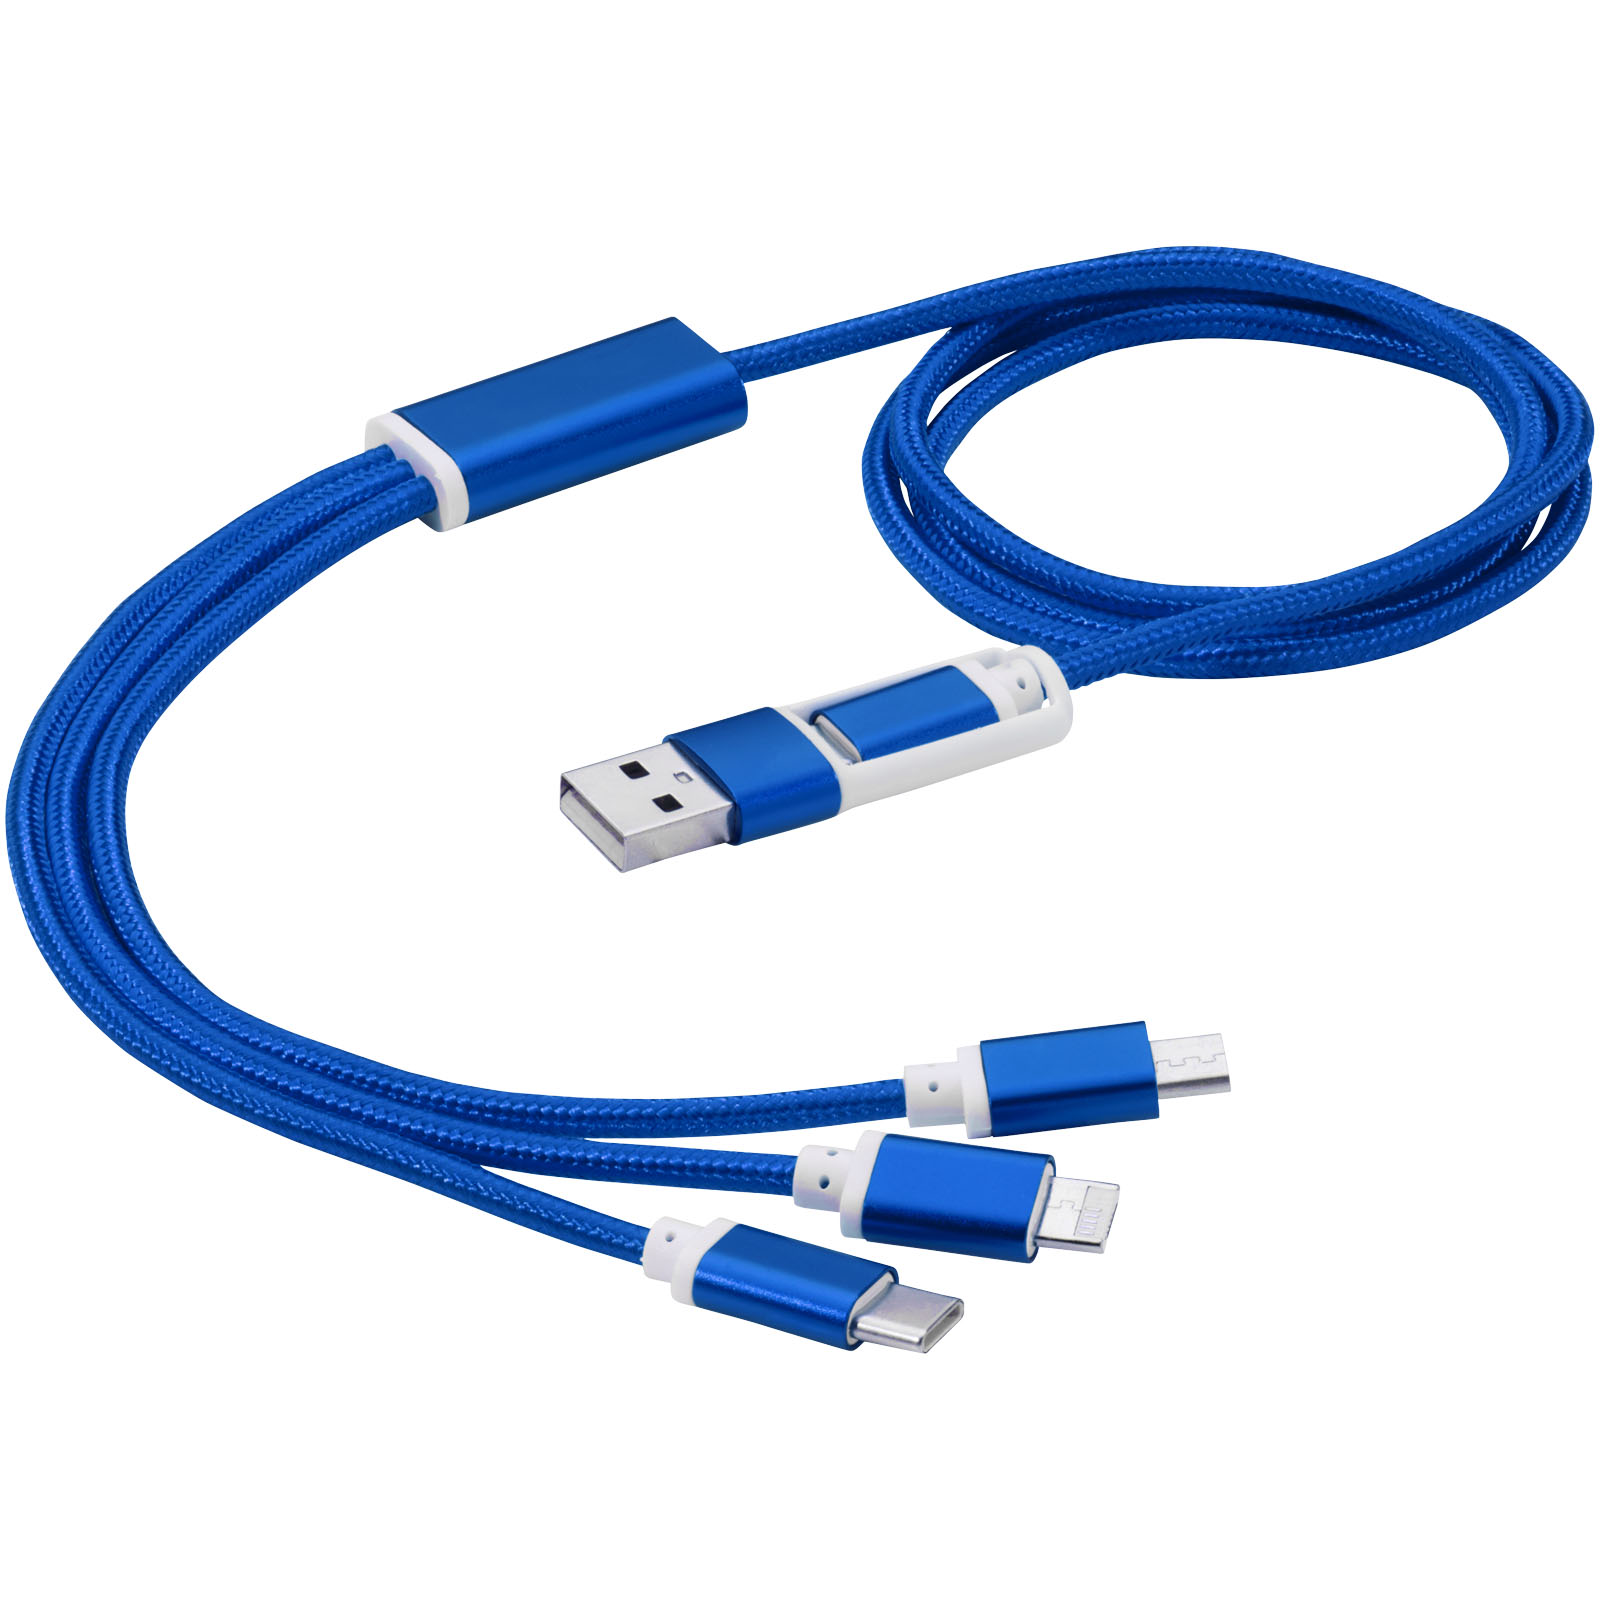 Advertising Cables - Versatile 5-in-1 charging cable - 0